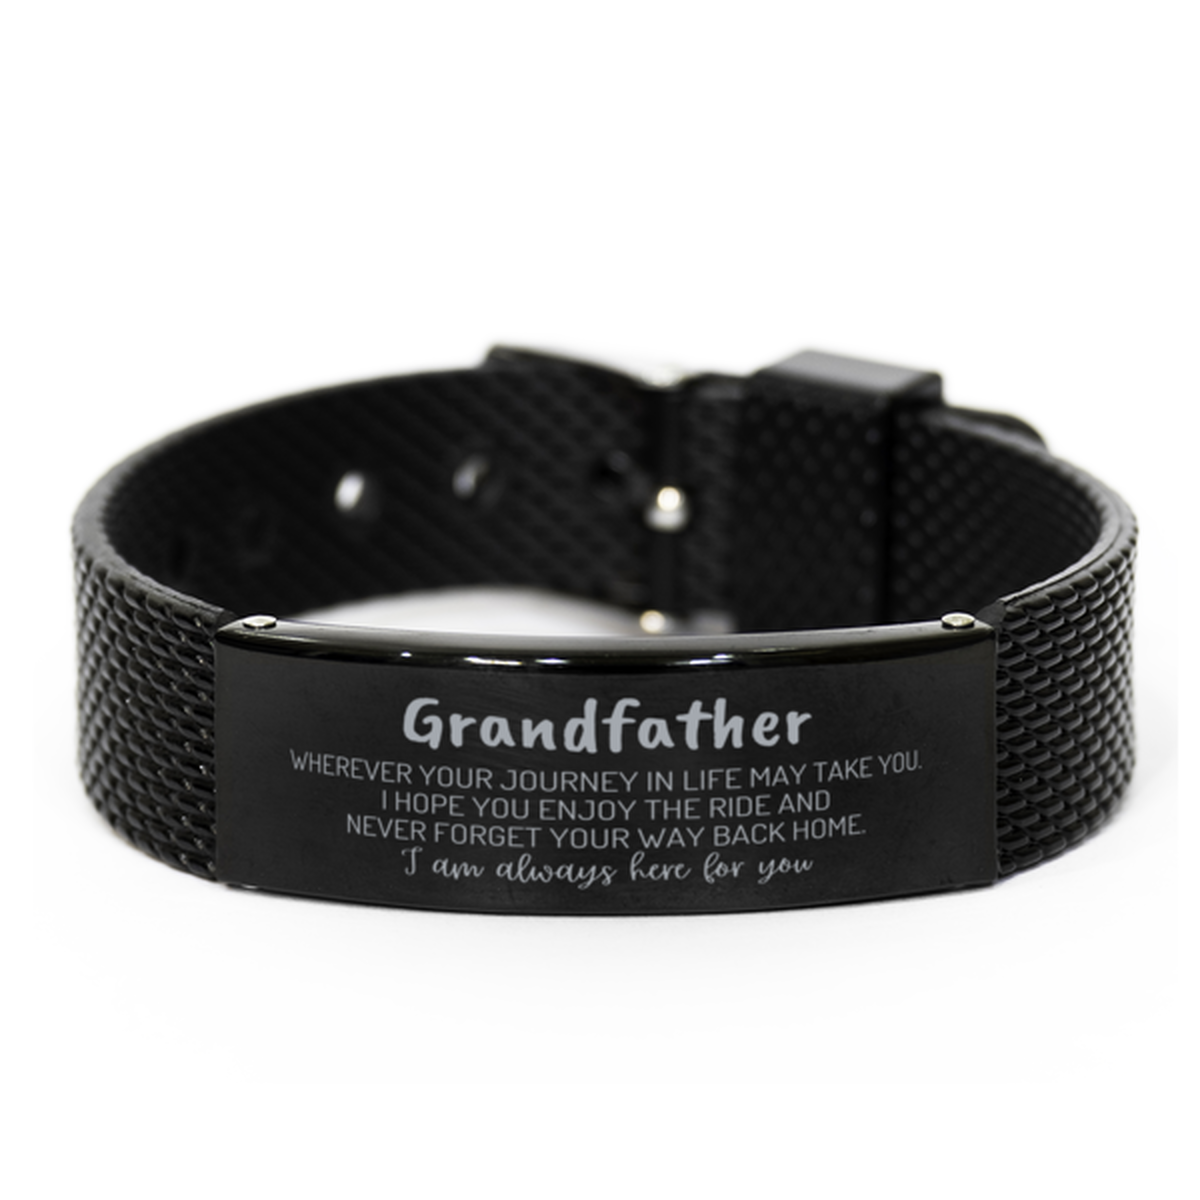 Grandfather wherever your journey in life may take you, I am always here for you Grandfather Black Shark Mesh Bracelet, Awesome Christmas Gifts For Grandfather, Grandfather Birthday Gifts for Men Women Family Loved One